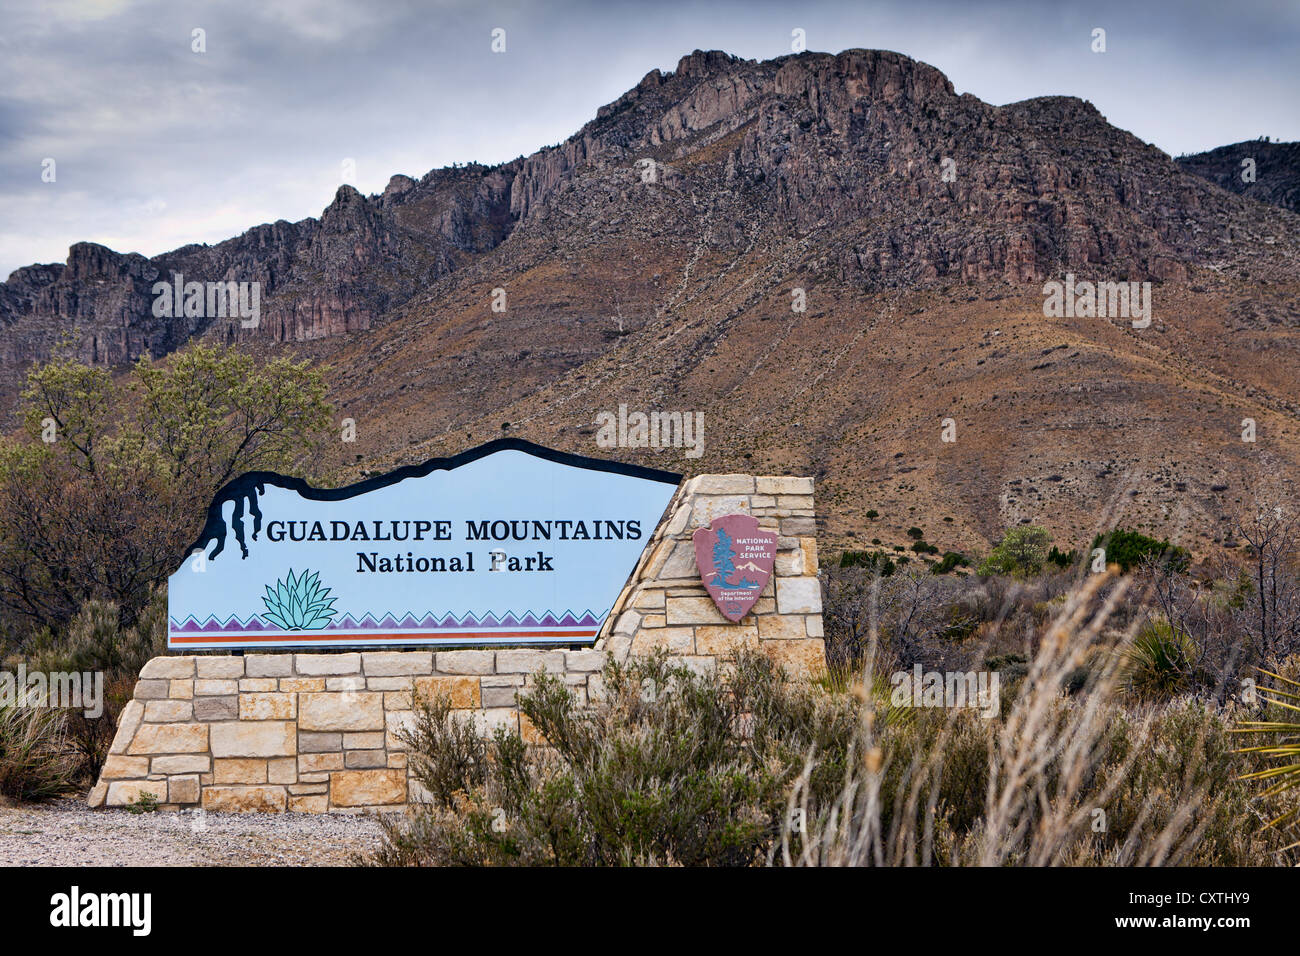 Guadalupe Mountains National Park marker sign Stock Photo